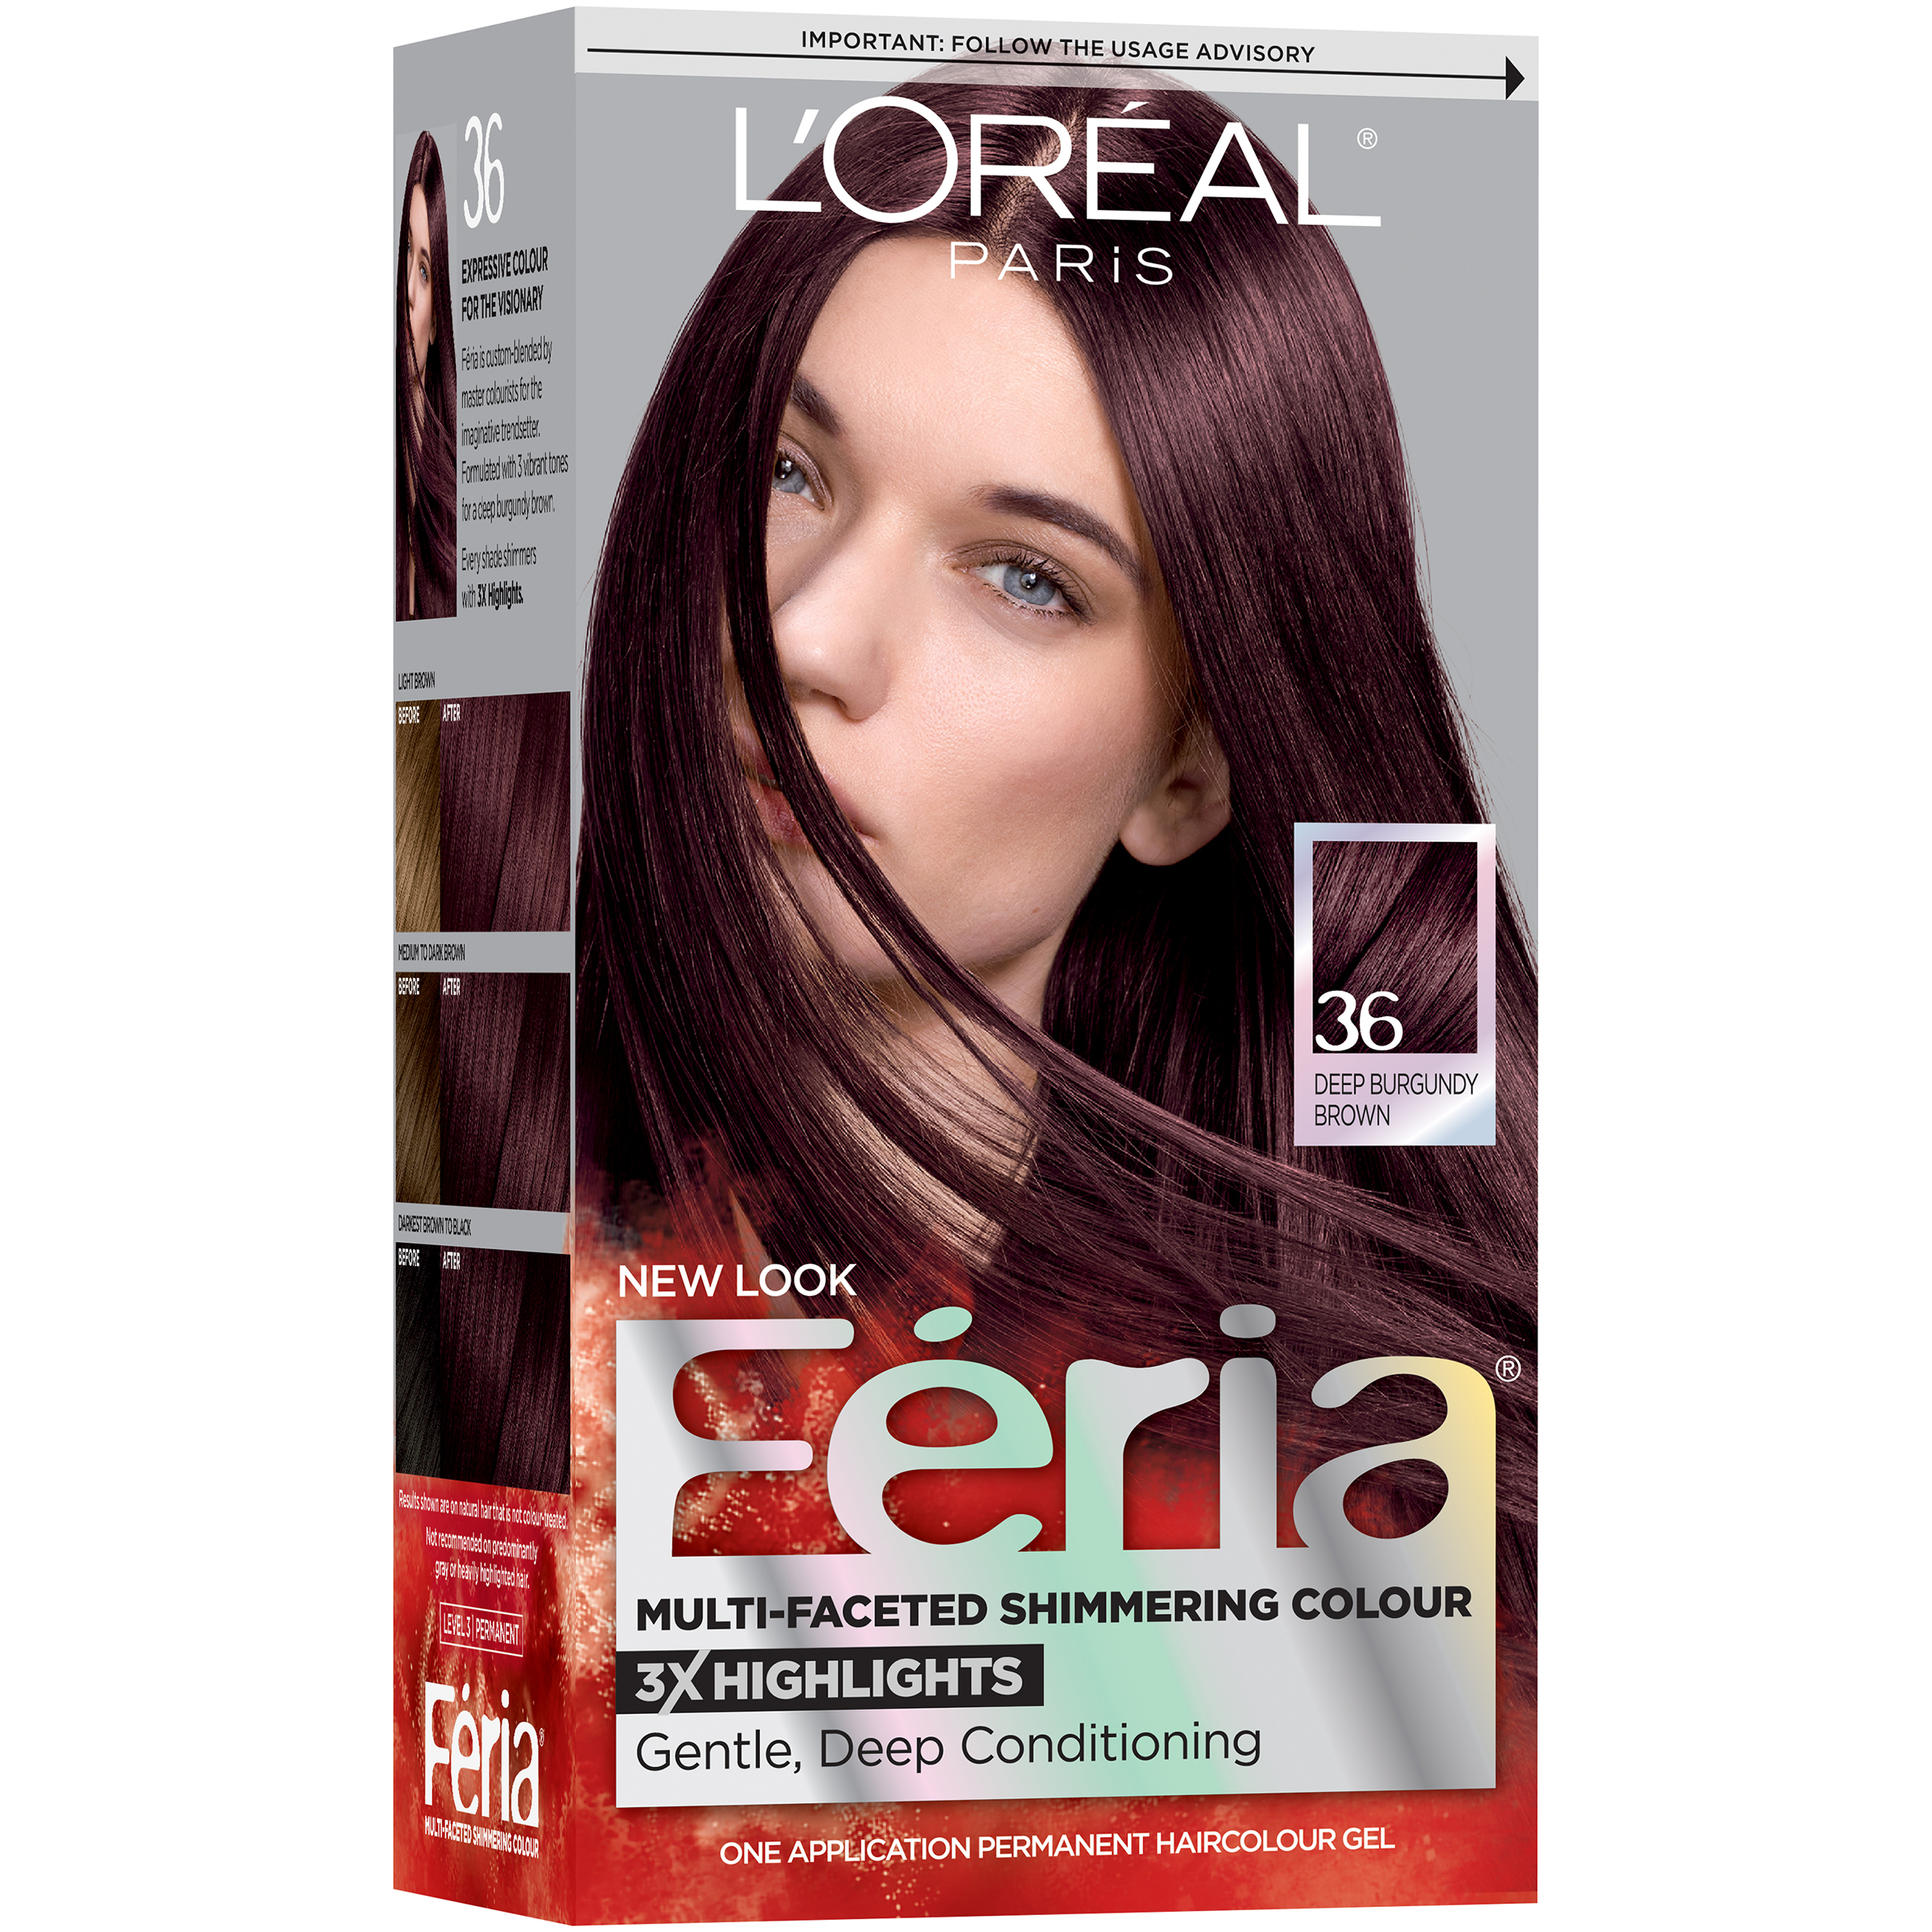 L'Oreal Feria Multi-Faceted Shimmering Colour Deep Burgundy Brown 36 Hair Color 1 Ct Box